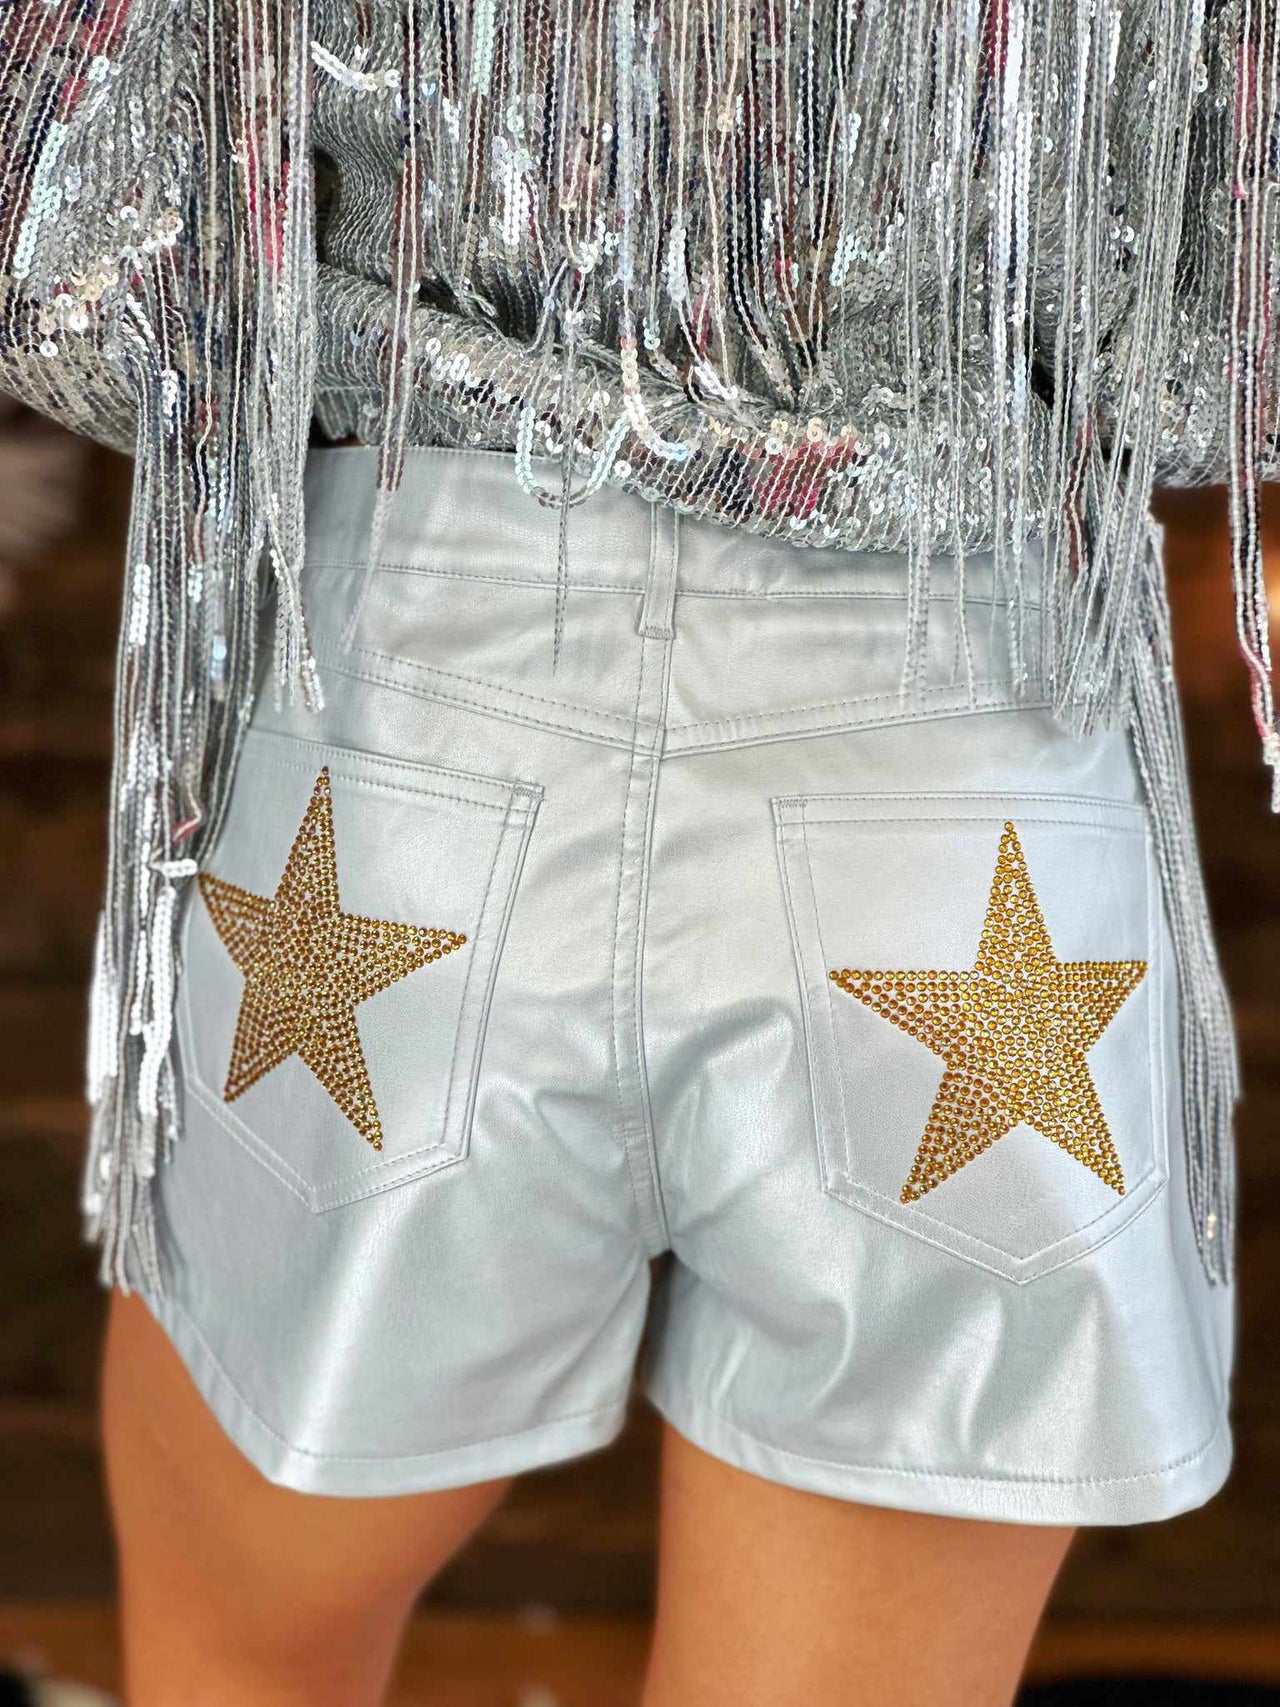 Faux leather metallic shorts with stars.